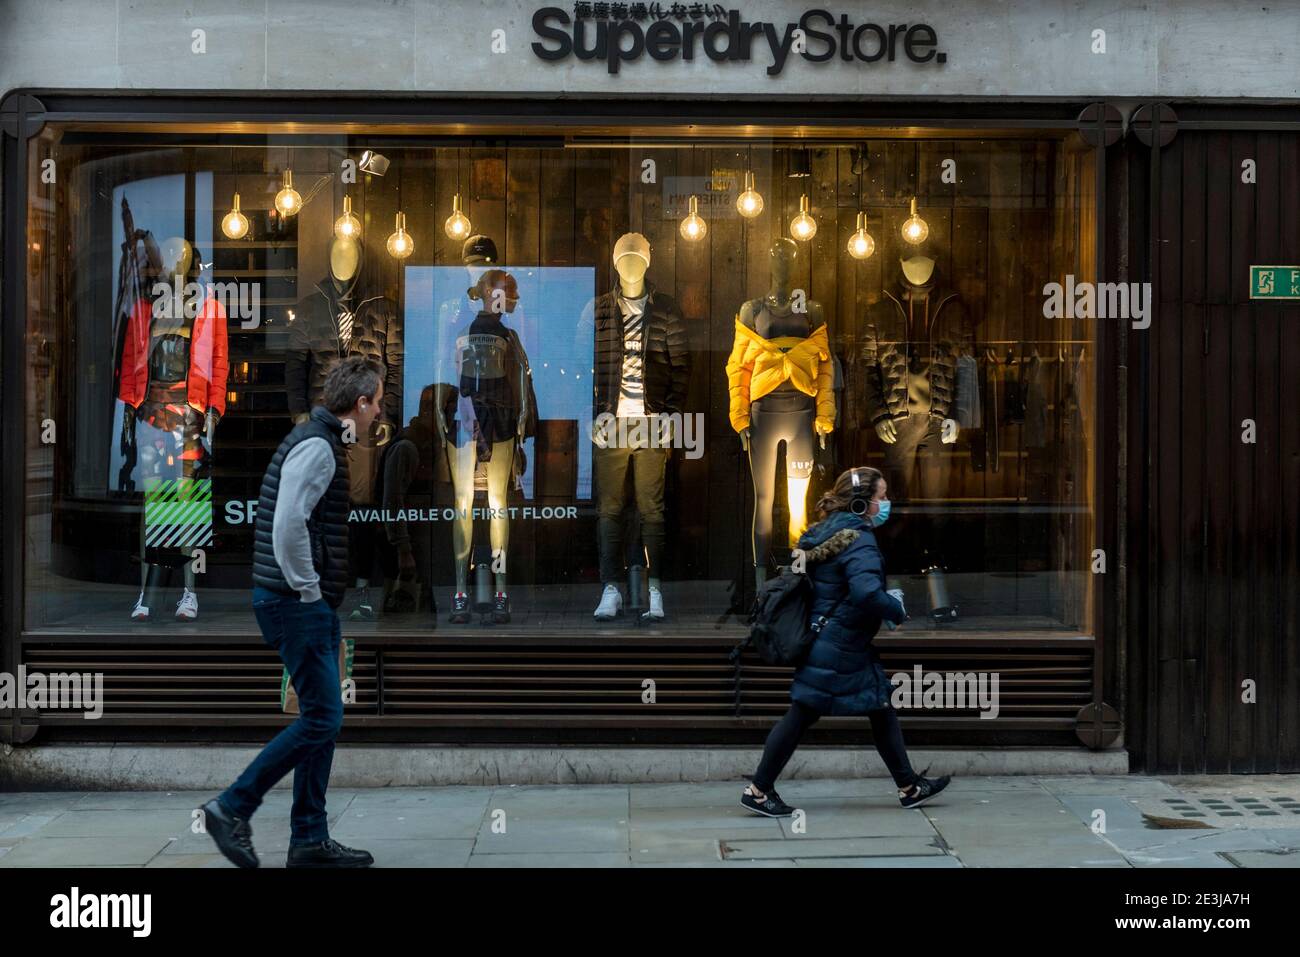 London, UK. 19 January 2021. The exterior of Superdry's flagship retail  store on Regent Street in the West End. The retail group has issued a  warning over its ability to continue as